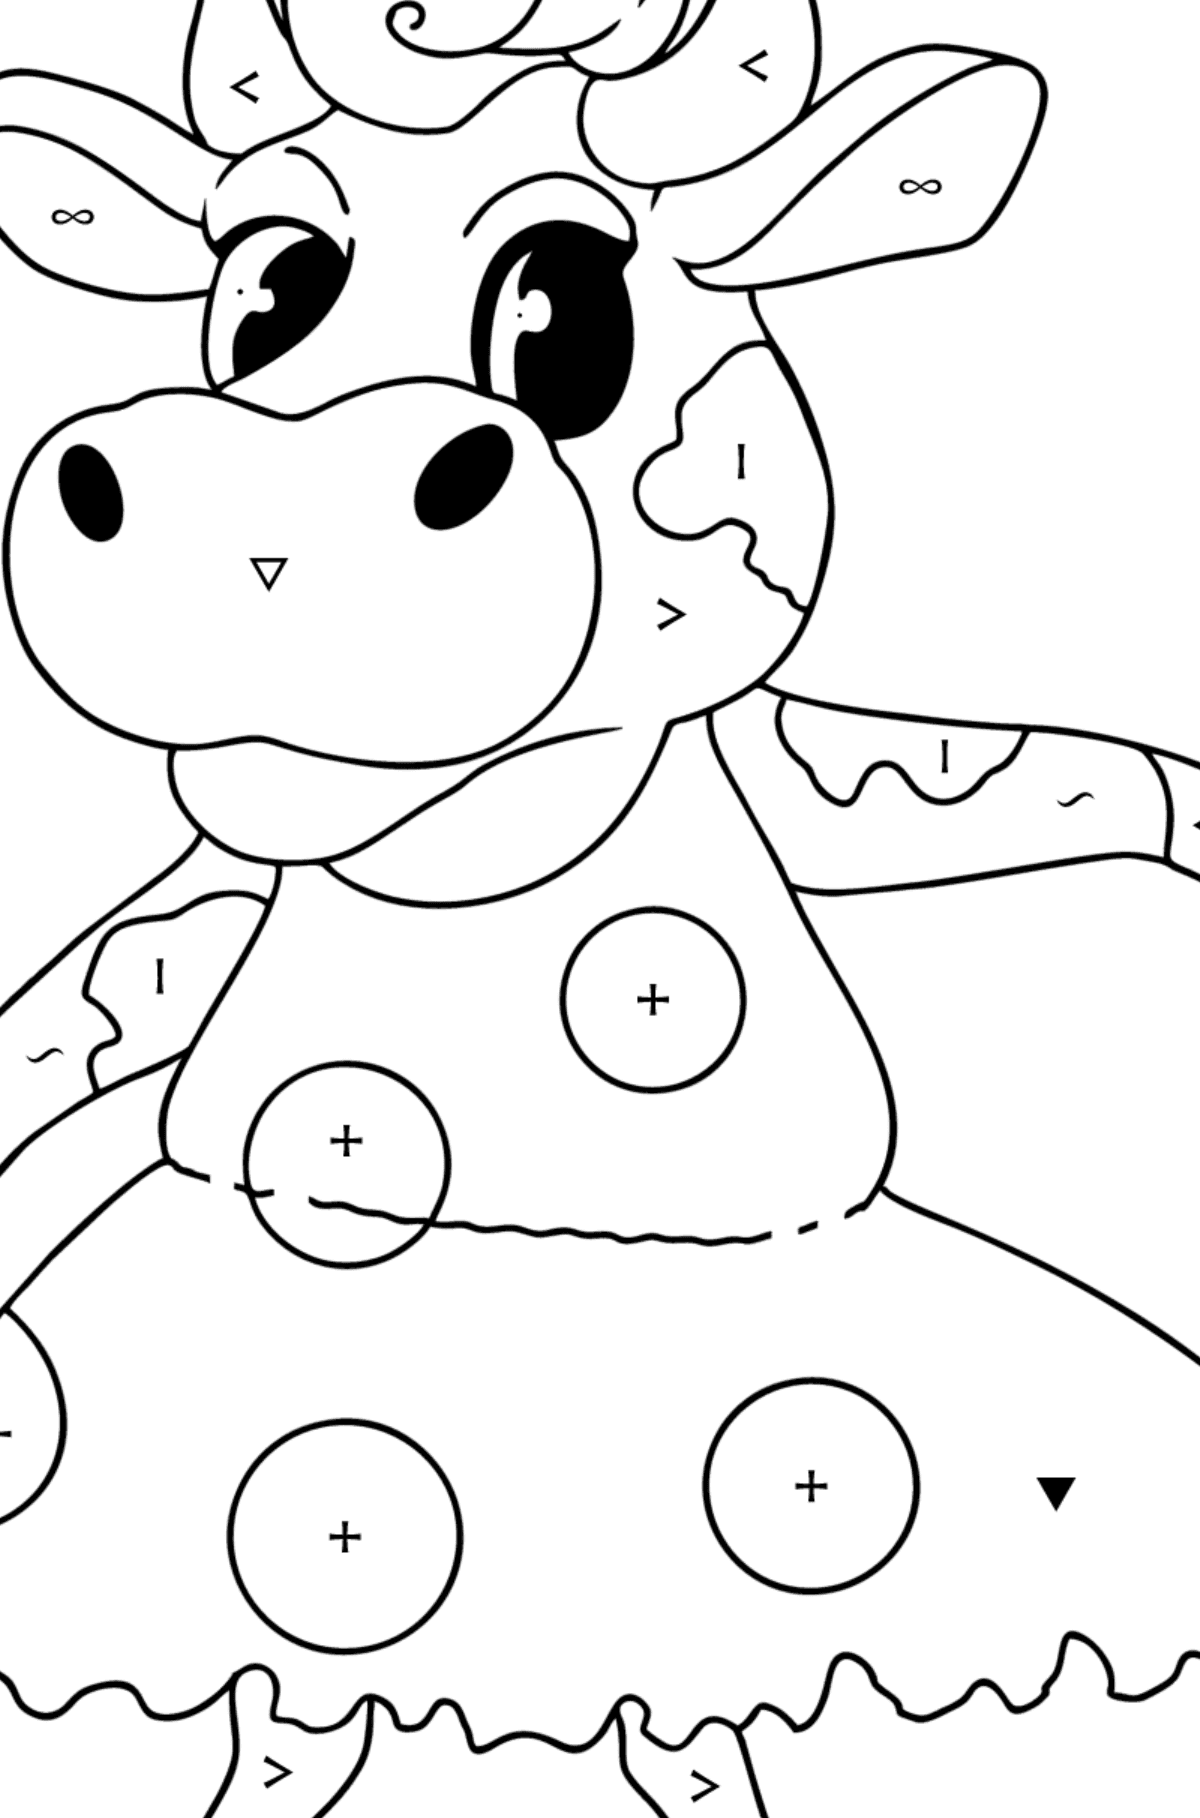 Kawaii cow standing up coloring page - Coloring by Symbols for Kids